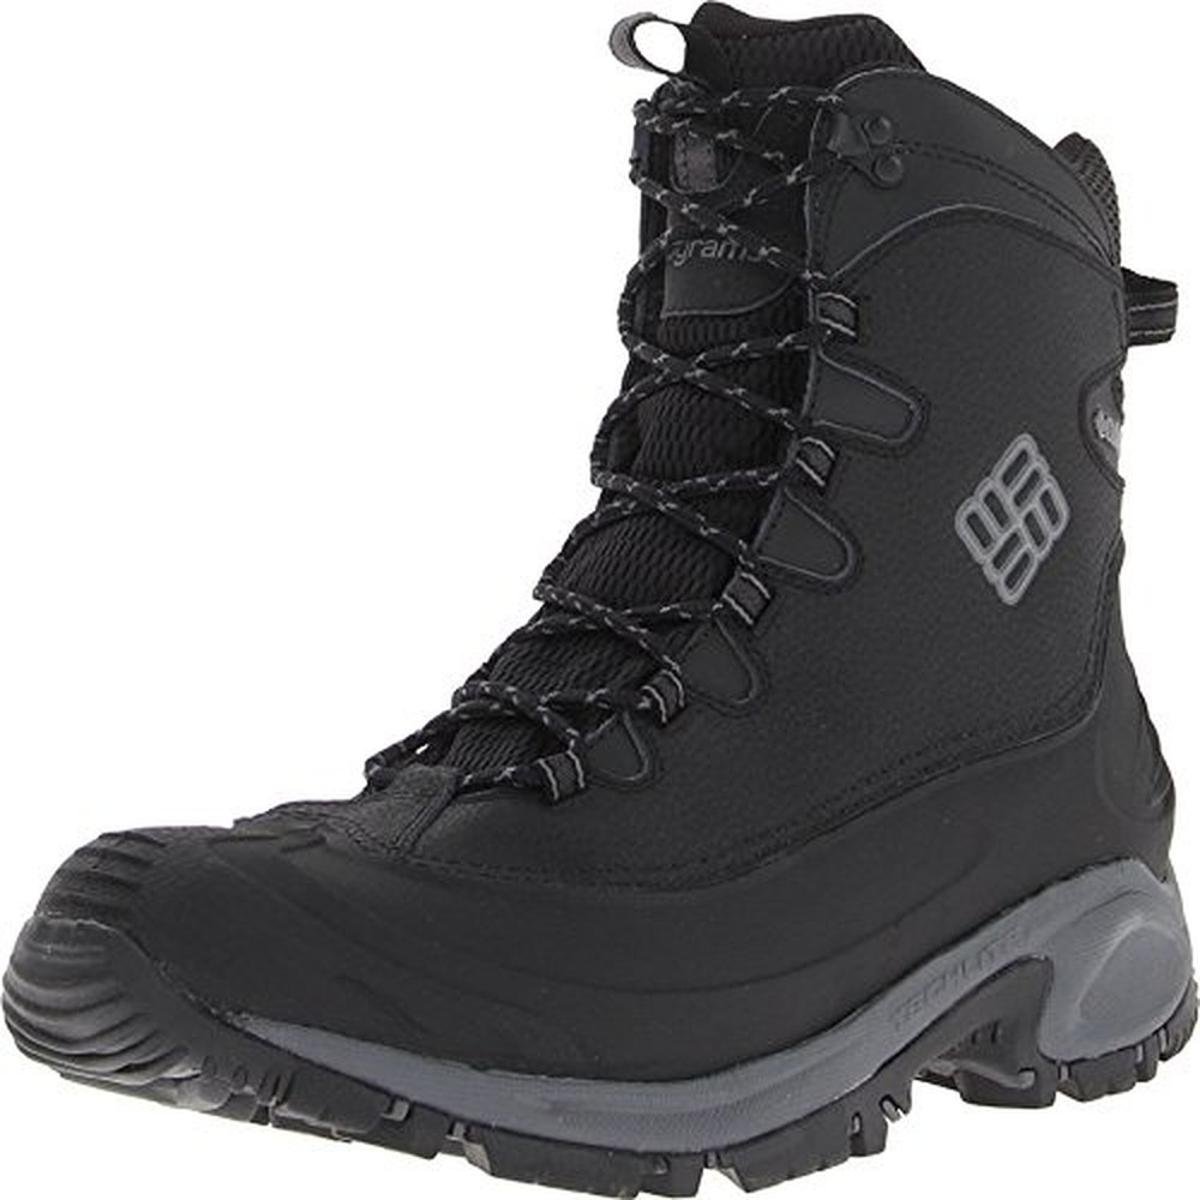 Columbia 8989 Mens Bugaboot Black Leather Waterproof Snow Boots Shoes 8 ...